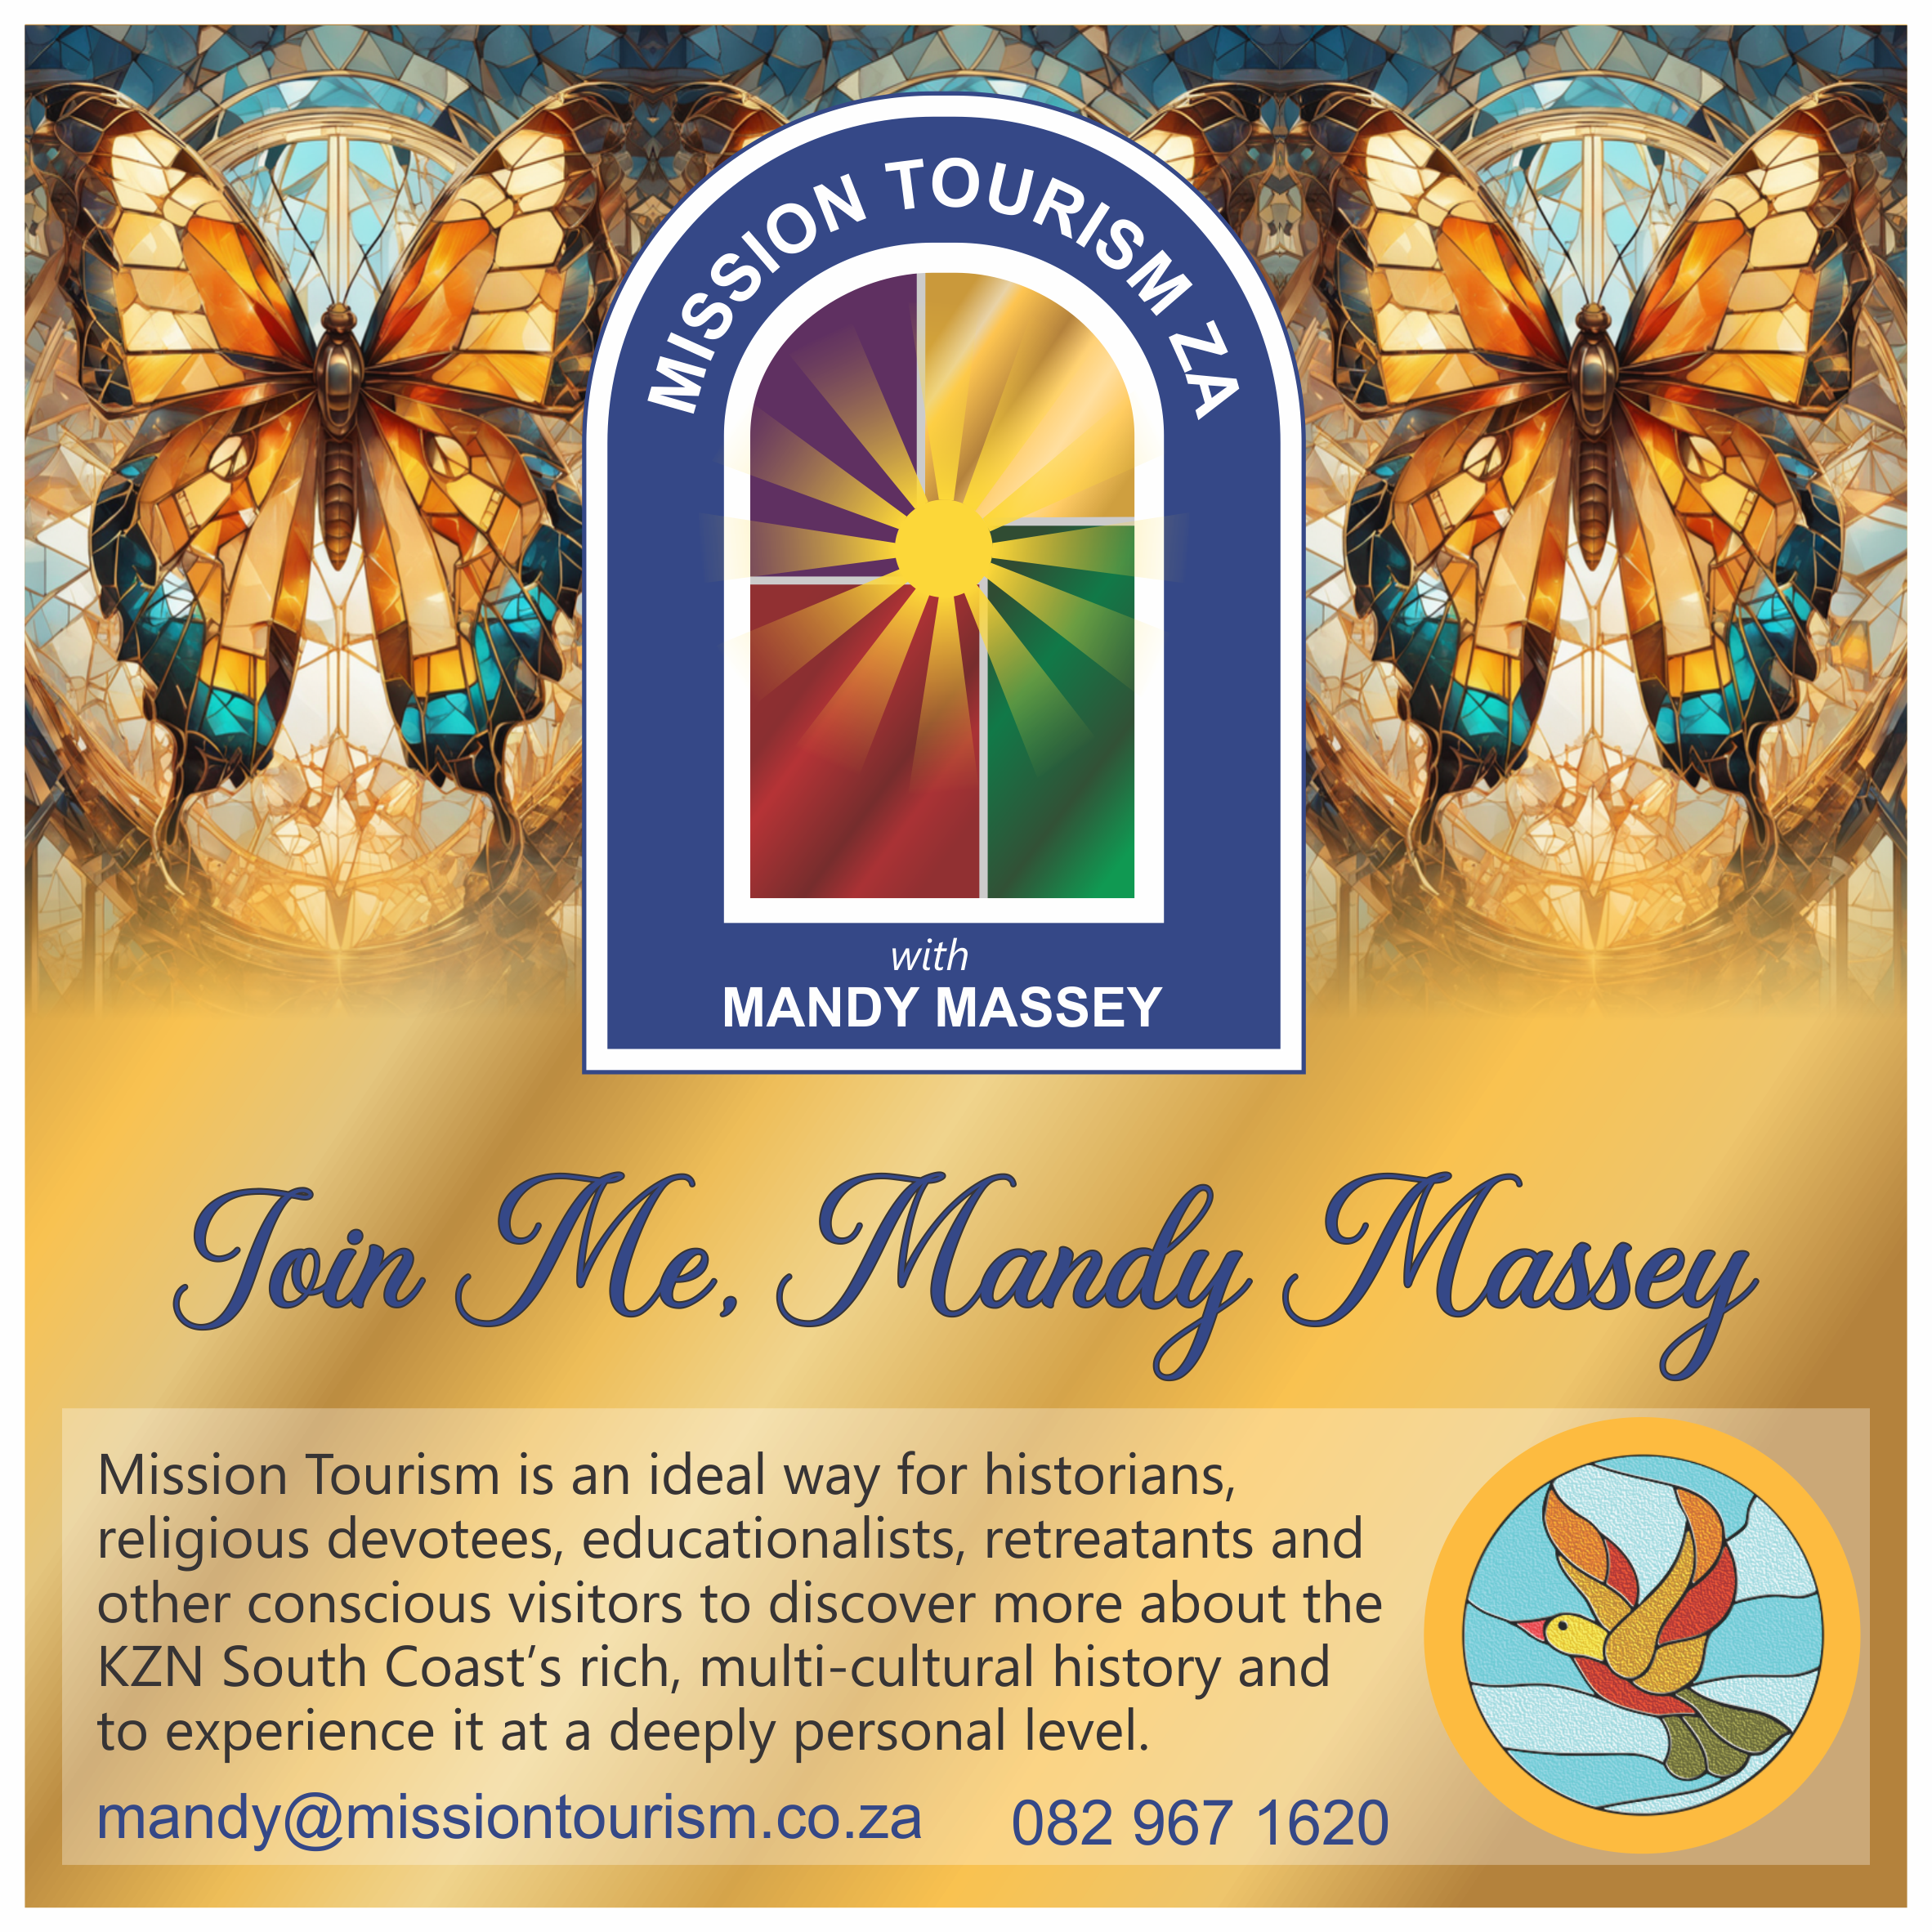 Odyssey Magazine advertiser mission travels mandy massey historical architecture stained glass windows